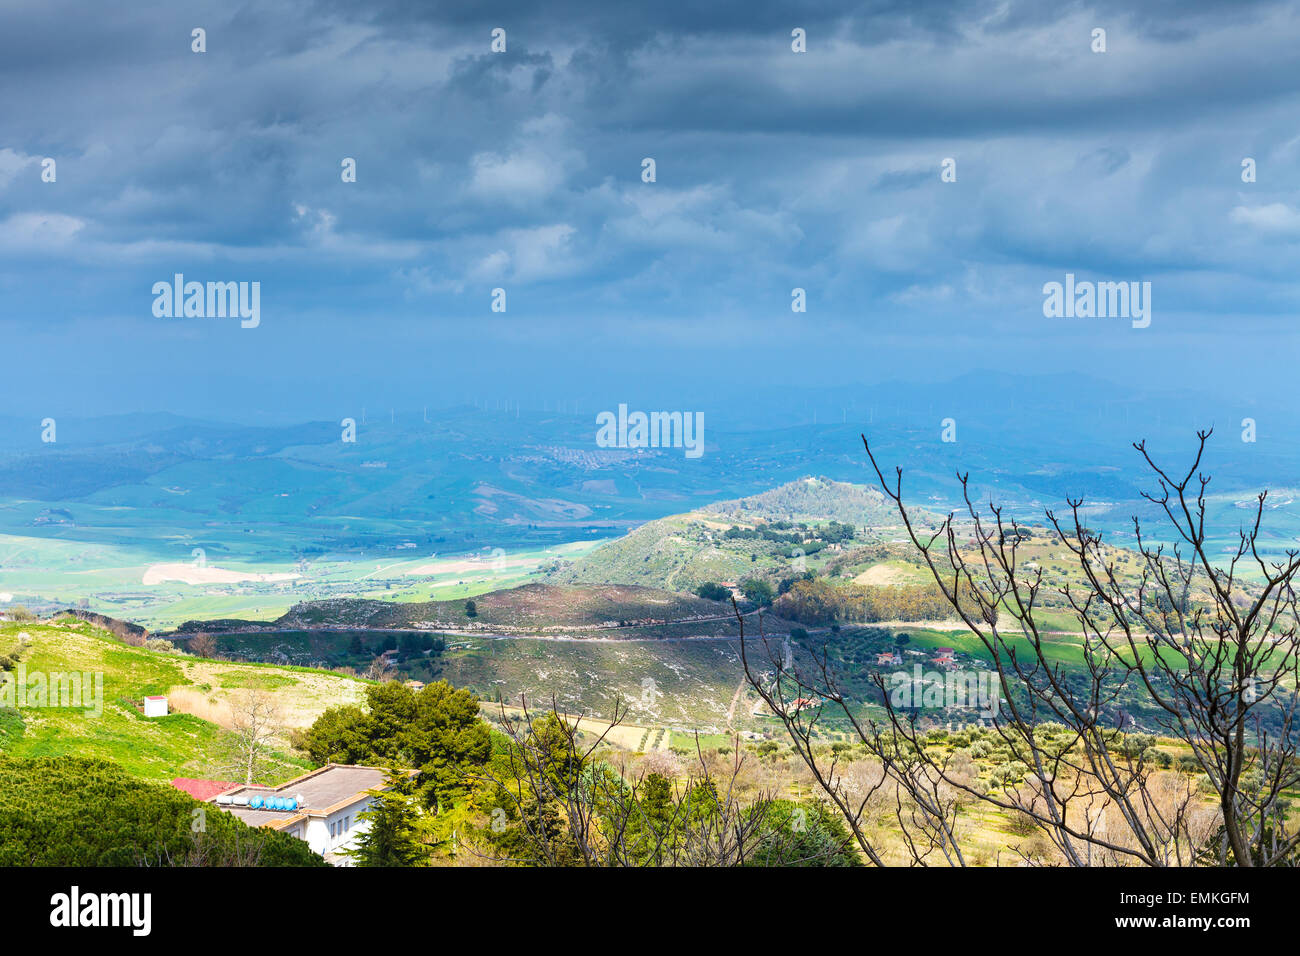 dark blue rainy clouds over green sicilian hills in spring, Aidone, Italy Stock Photo